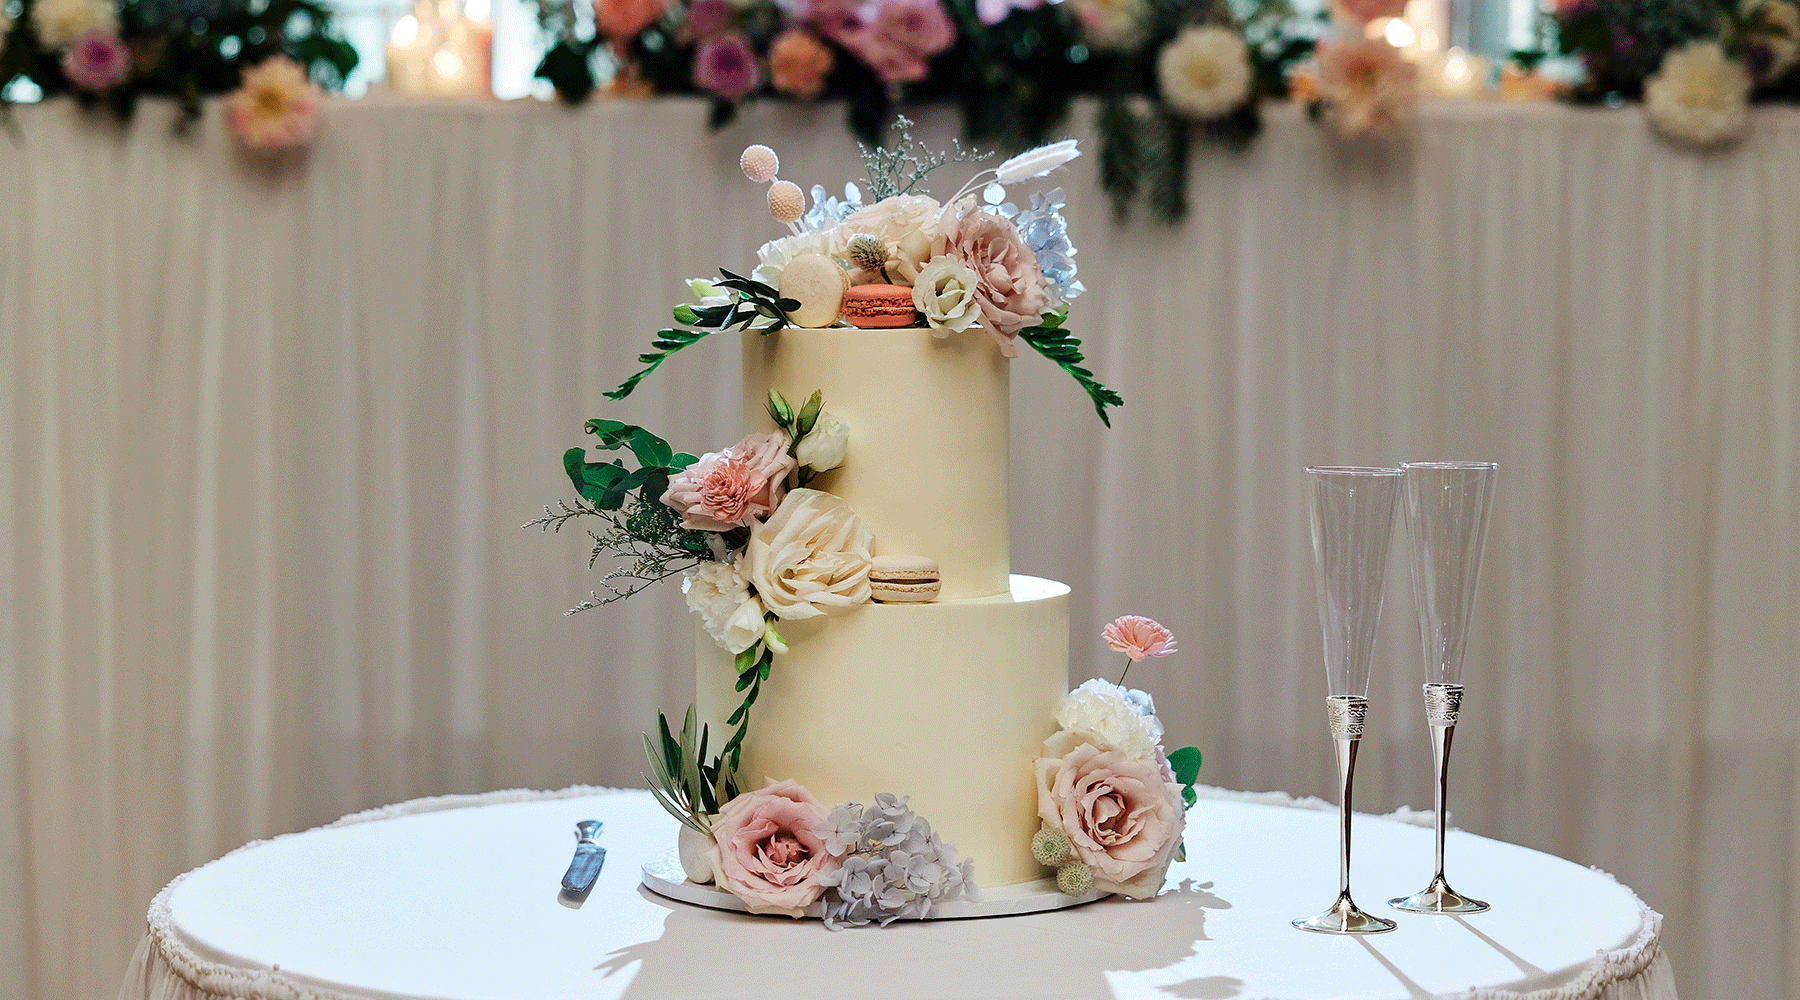 Siobahn and Marice's blue and pink buttercream wedding cake